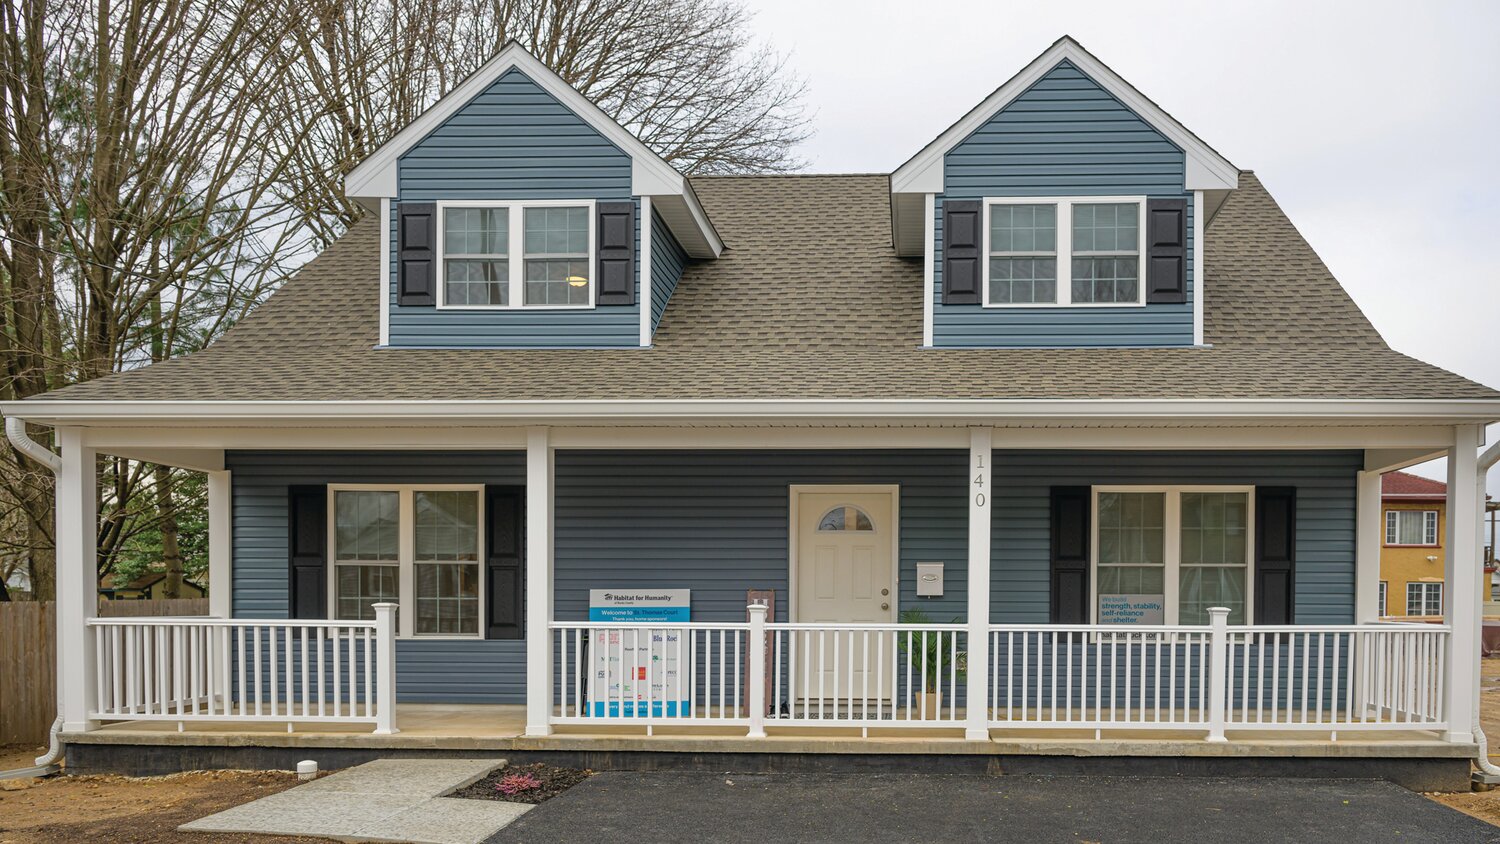 Habitat for Humanity of Bucks County this month dedicated its 129th home, a single family dwelling located on Walnut Street in Croydon.